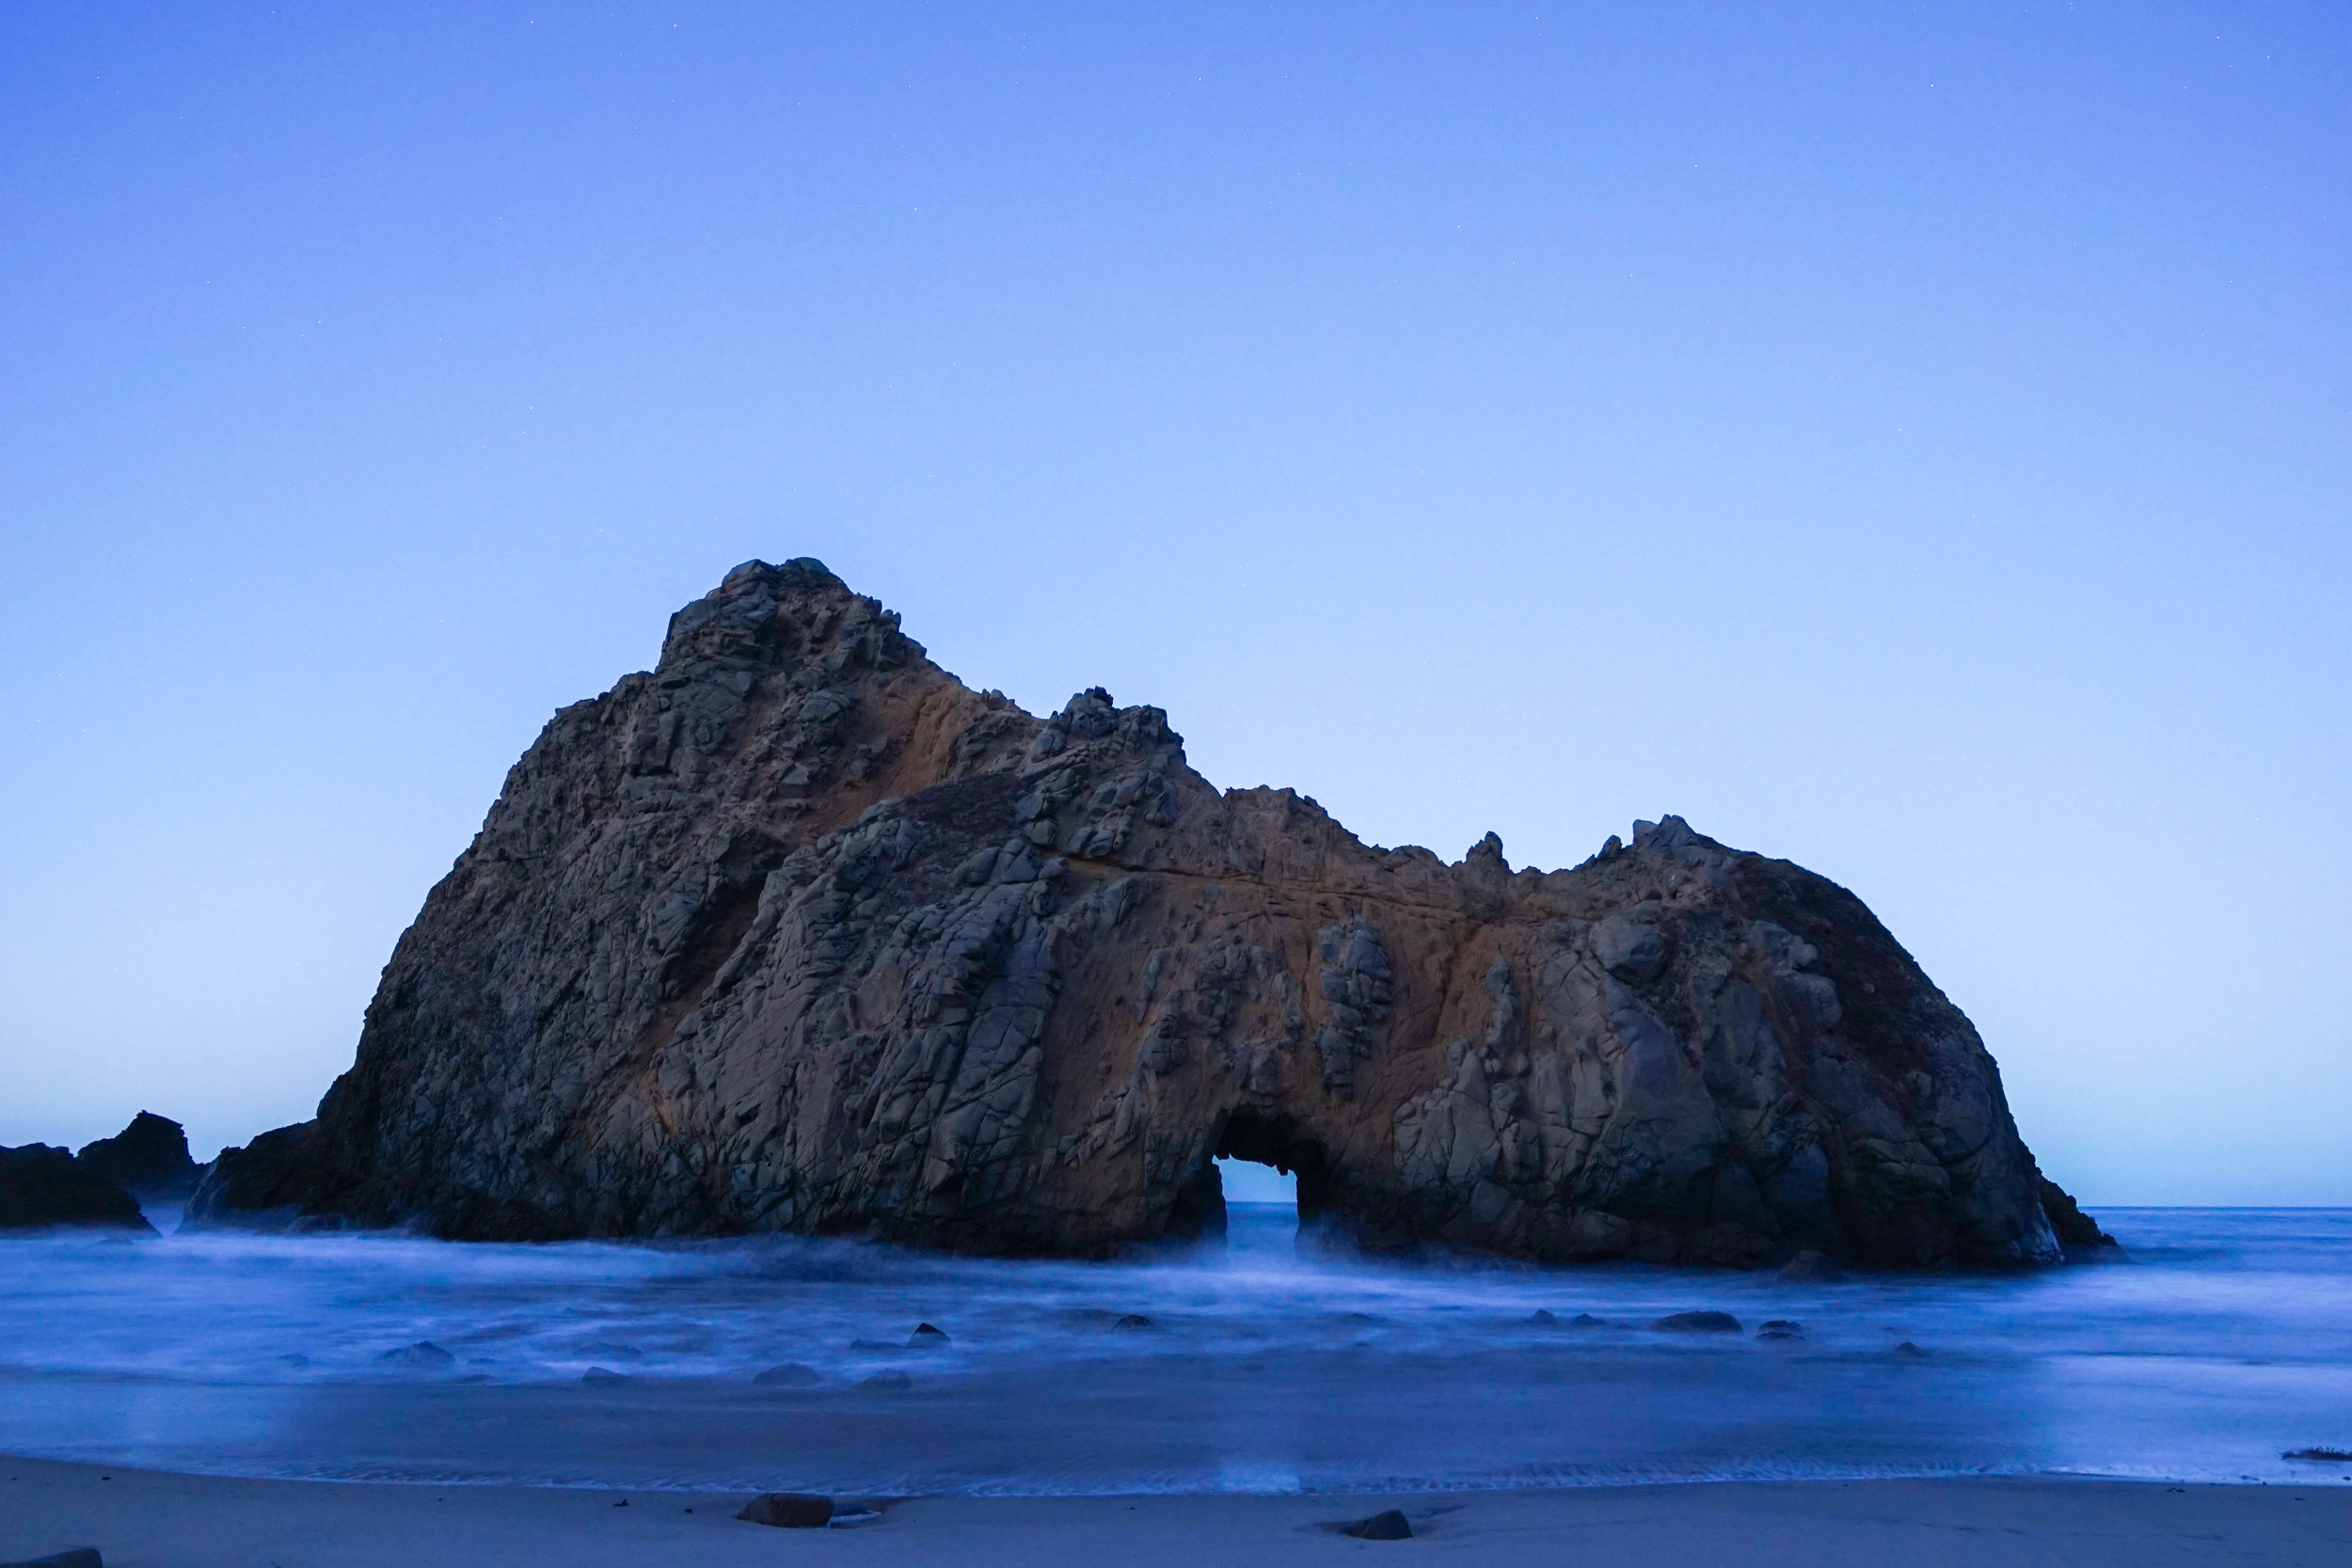 Battered by rough seas, the coastal rock is shaped into a thing of beauty.